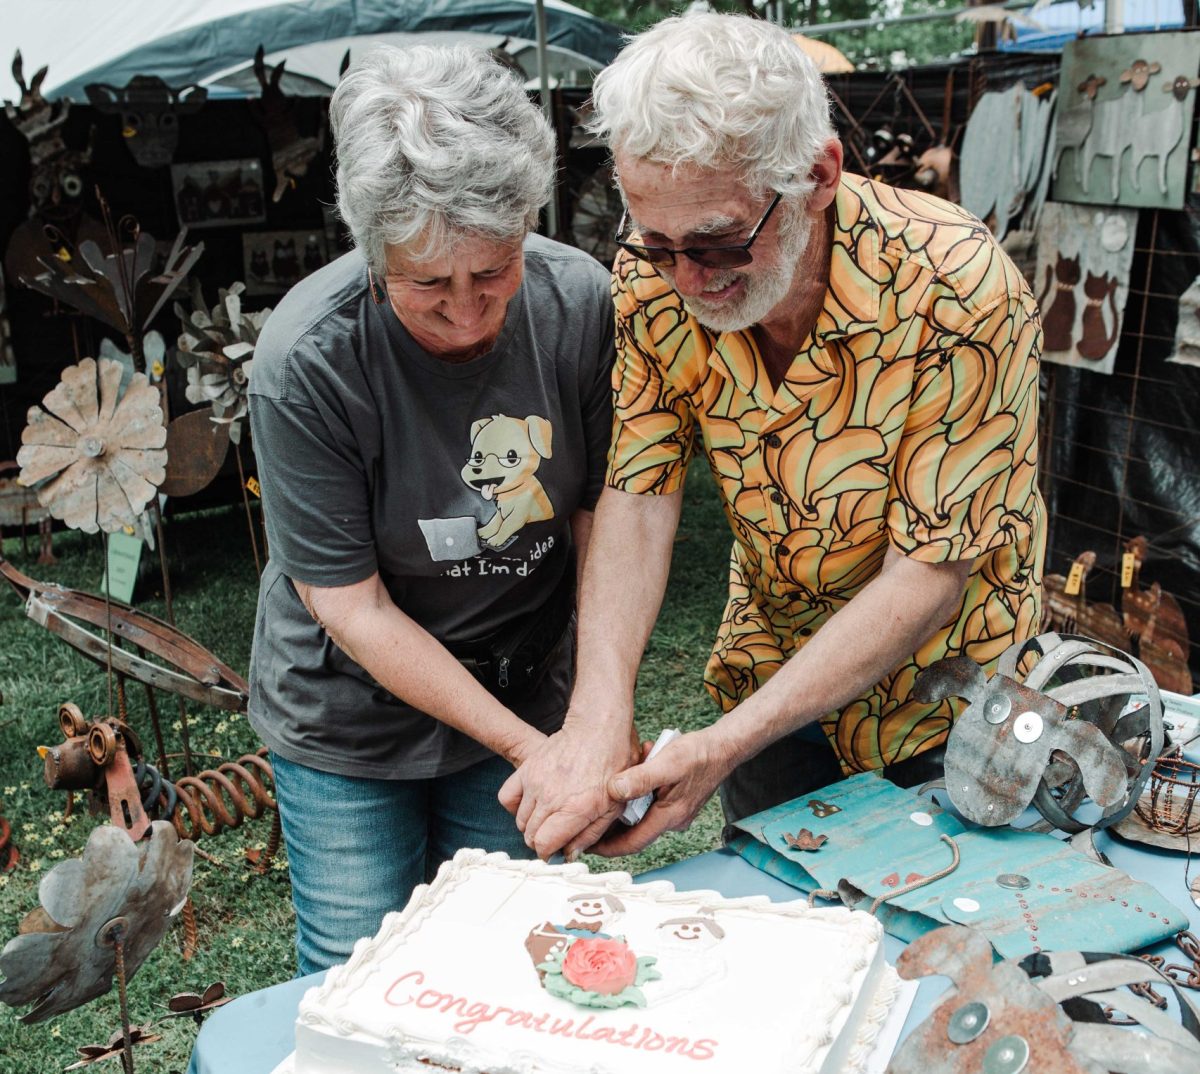 Two people cutting a cake